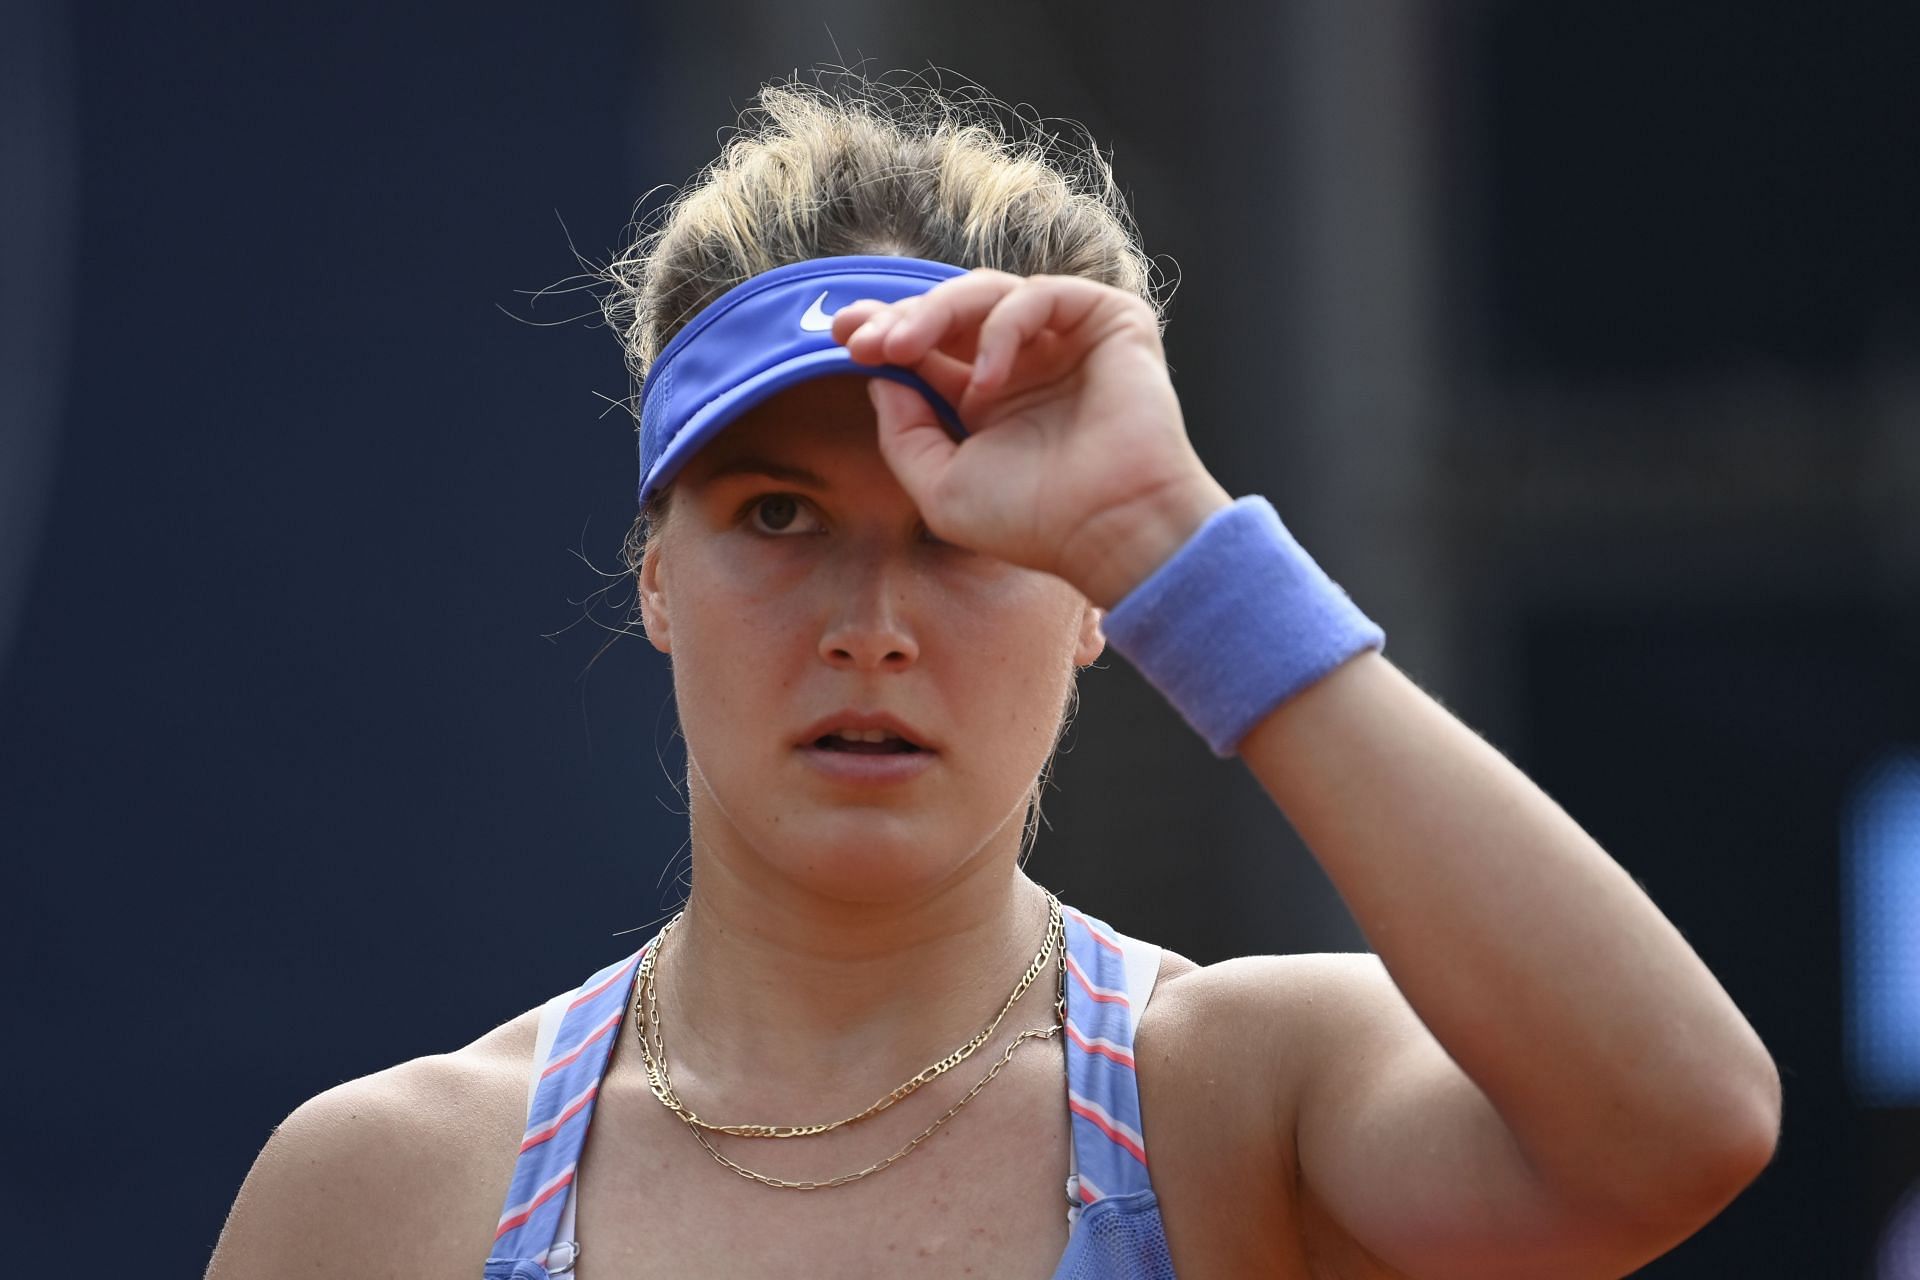 Eugenie Bouchard reached the semifinals of the Australian Open and French Open, and the final of Wimbledon in 2014.